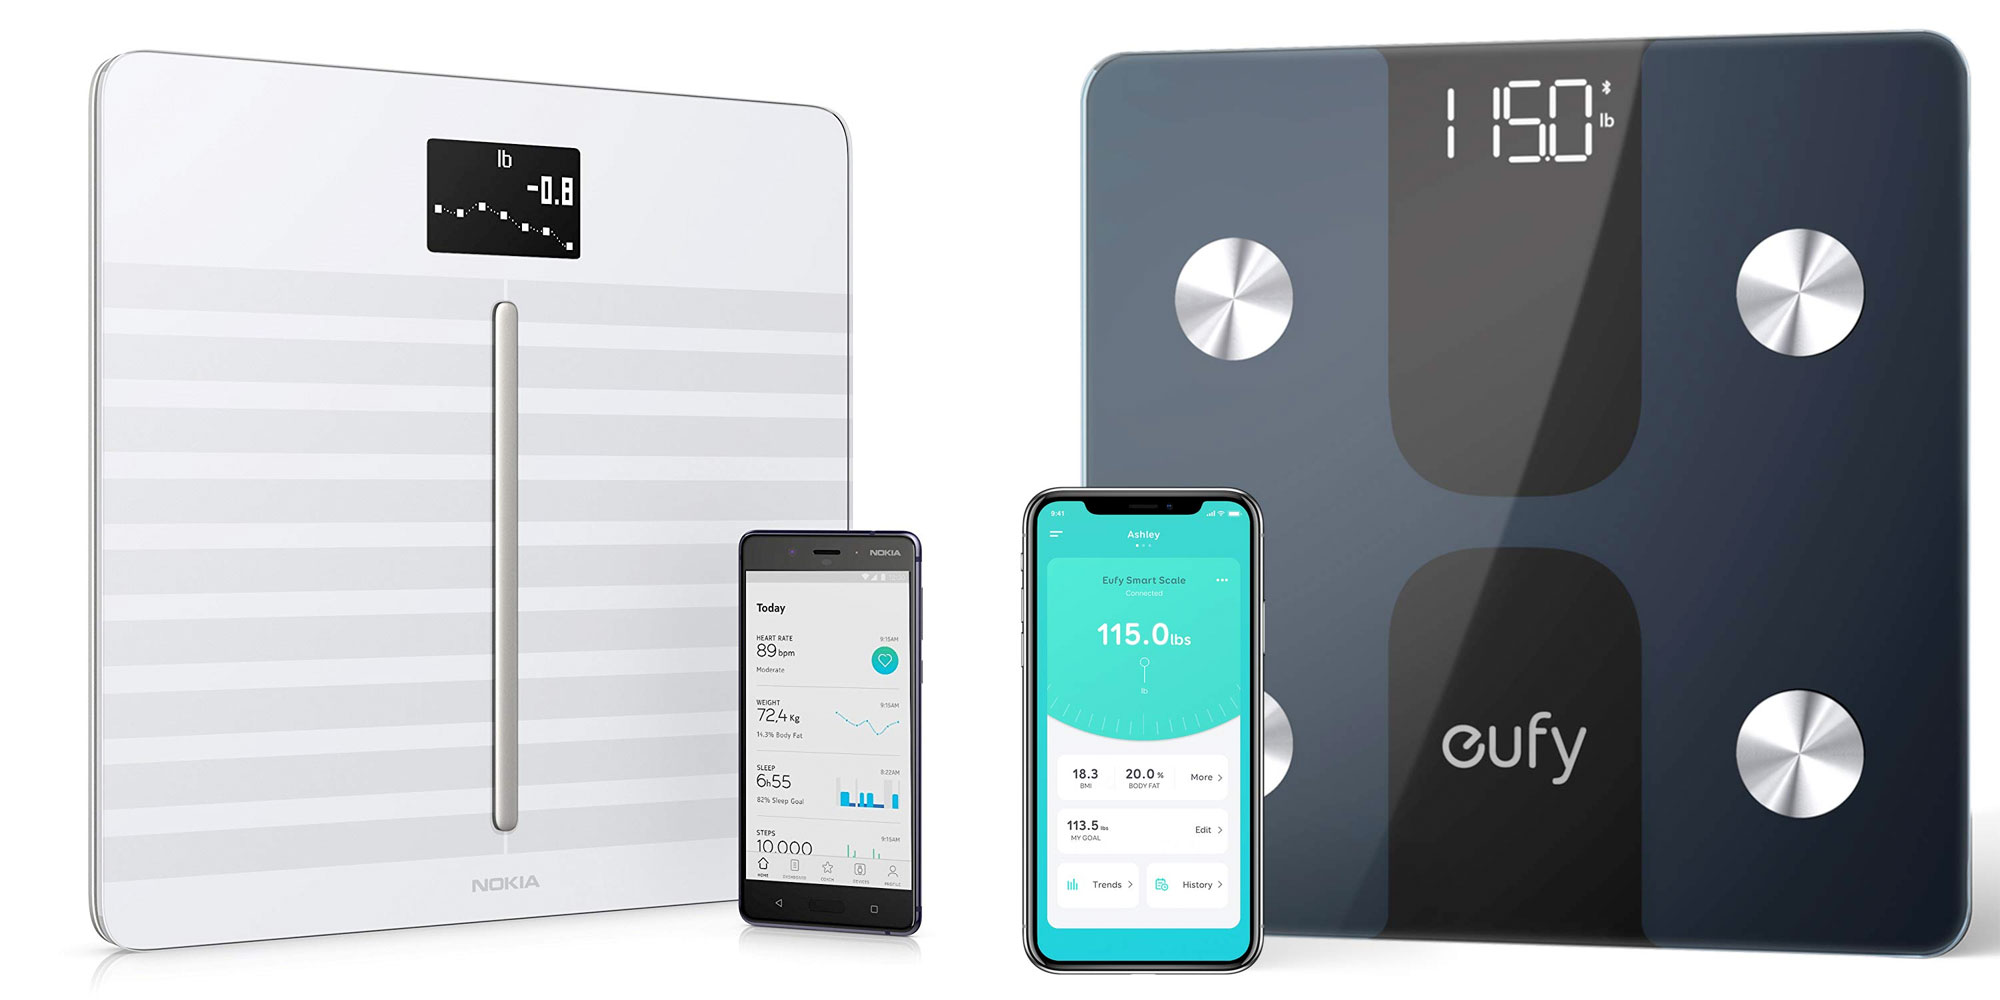 https://9to5toys.com/wp-content/uploads/sites/5/2019/05/Withings-Body-Cardio-Smart-Scale-Eufy-C1-Smart-Scale.jpg